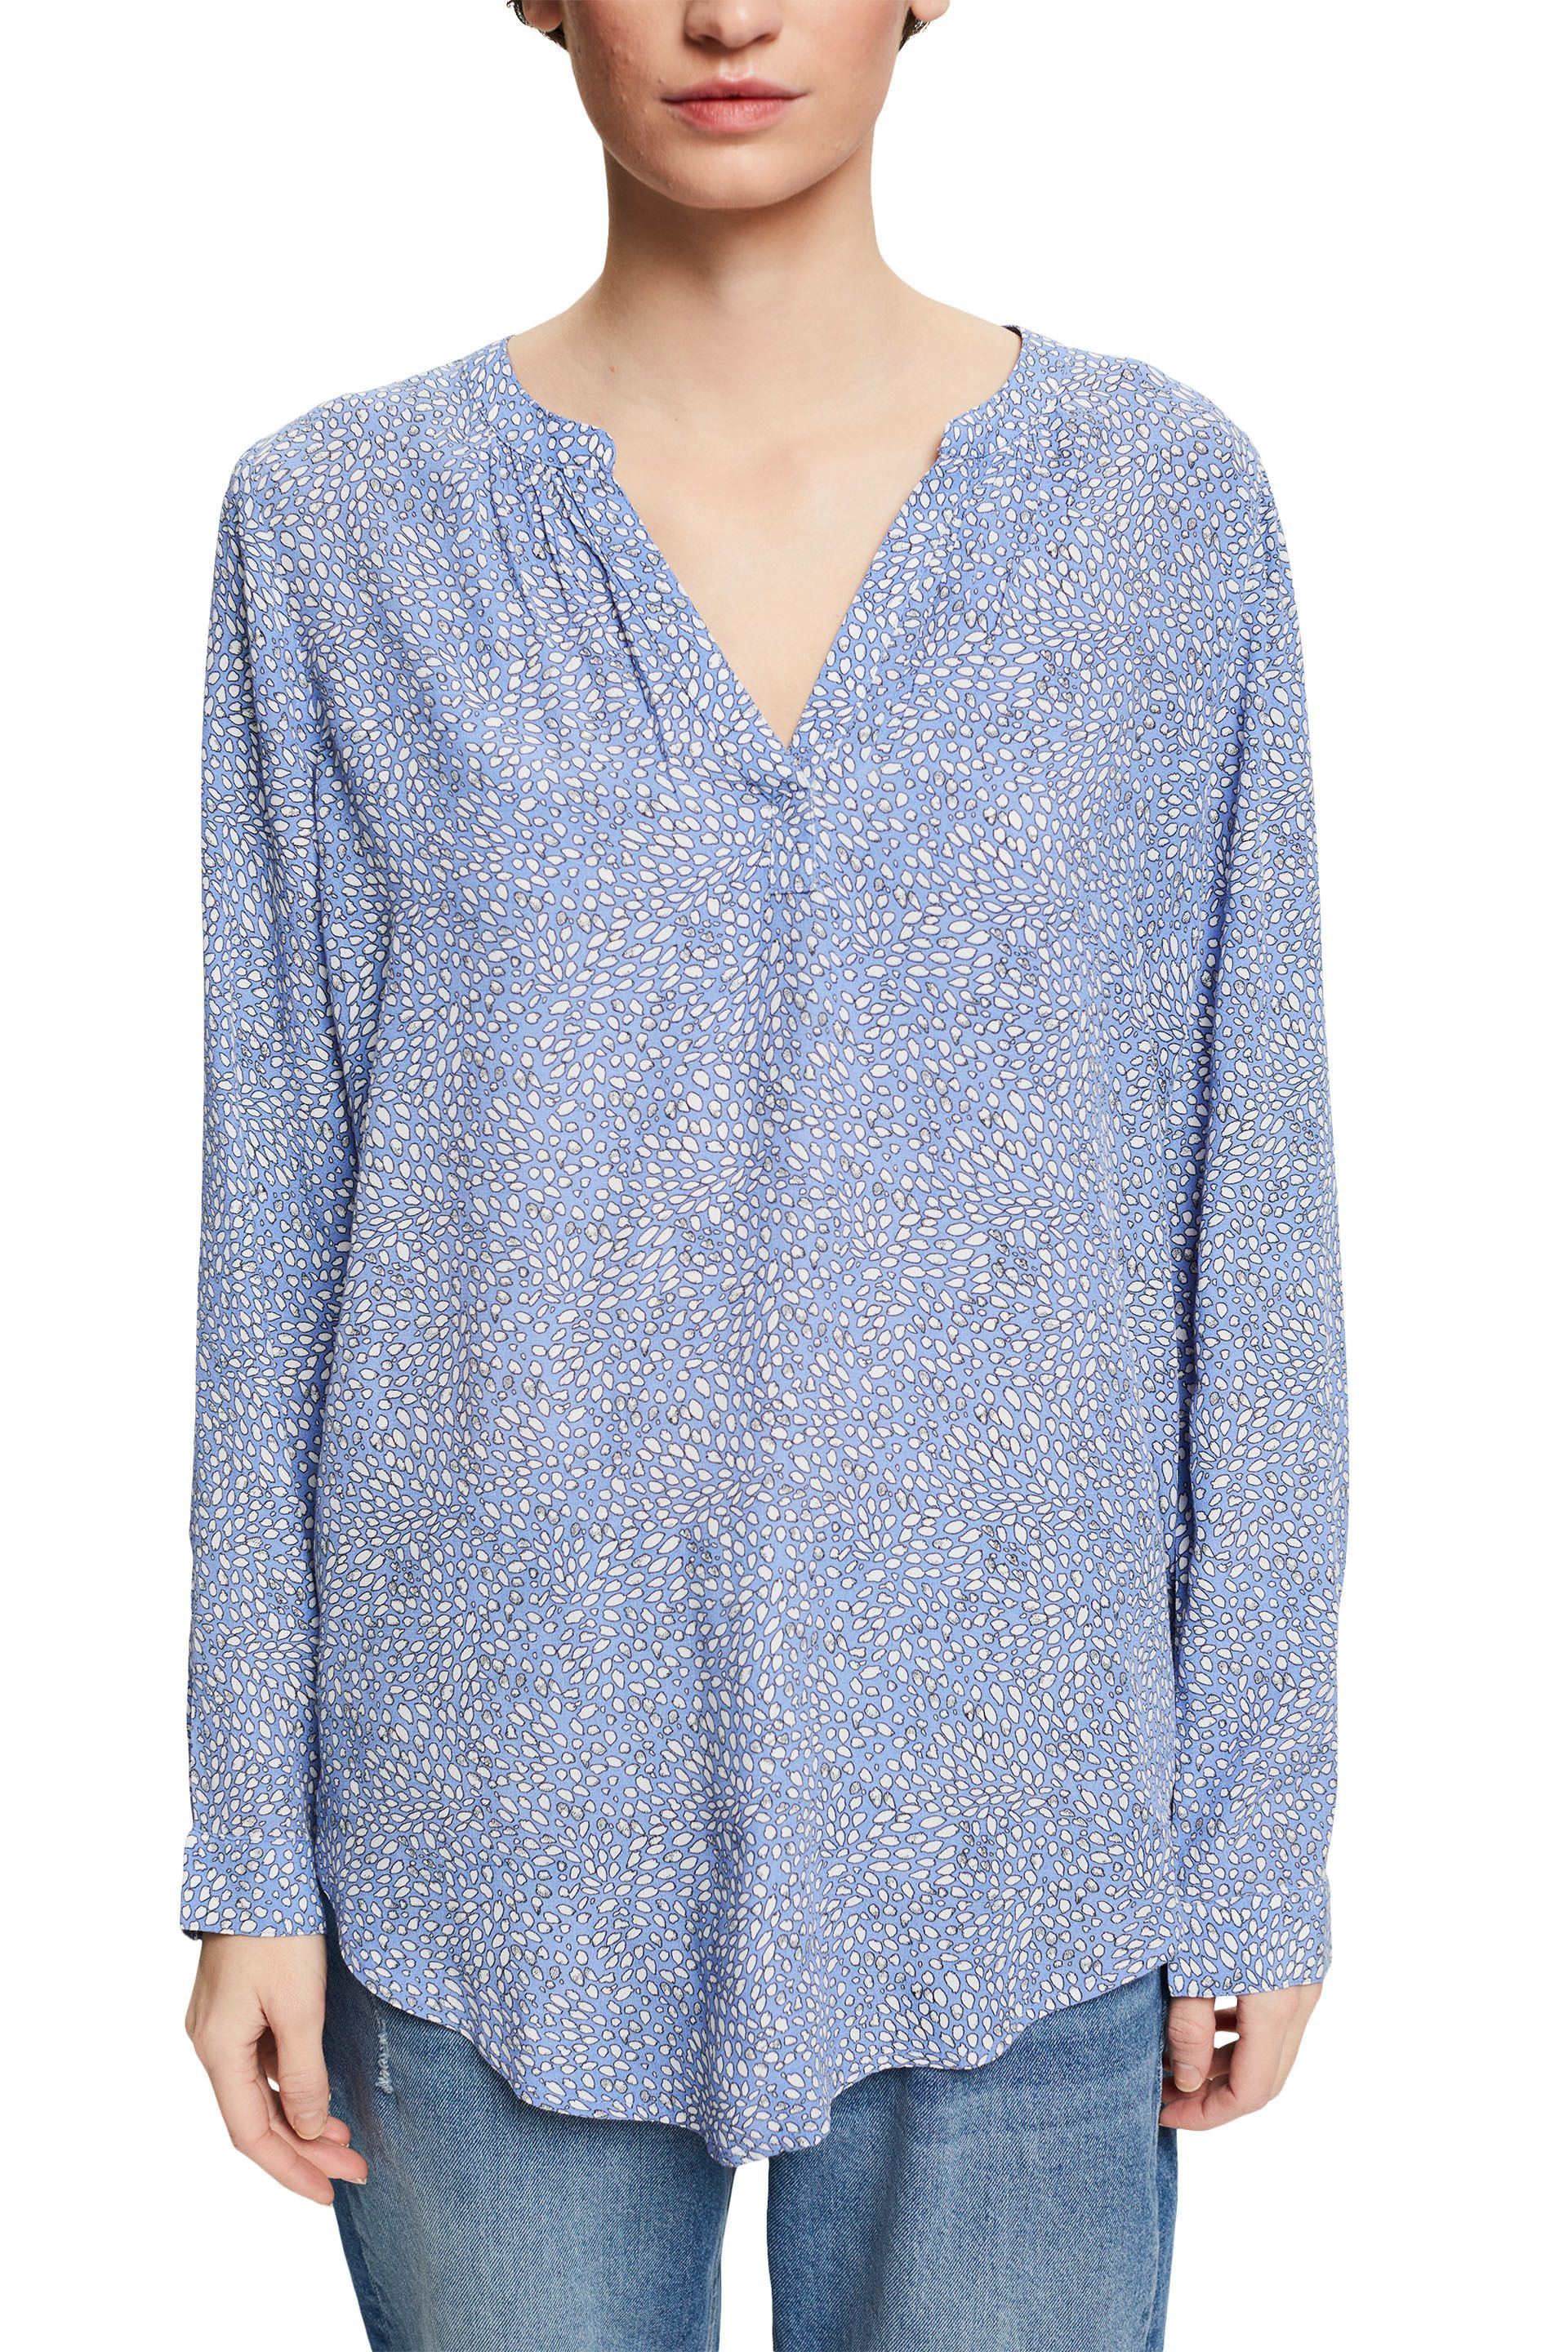 Blouse with pattern, Light Blue, large image number 2